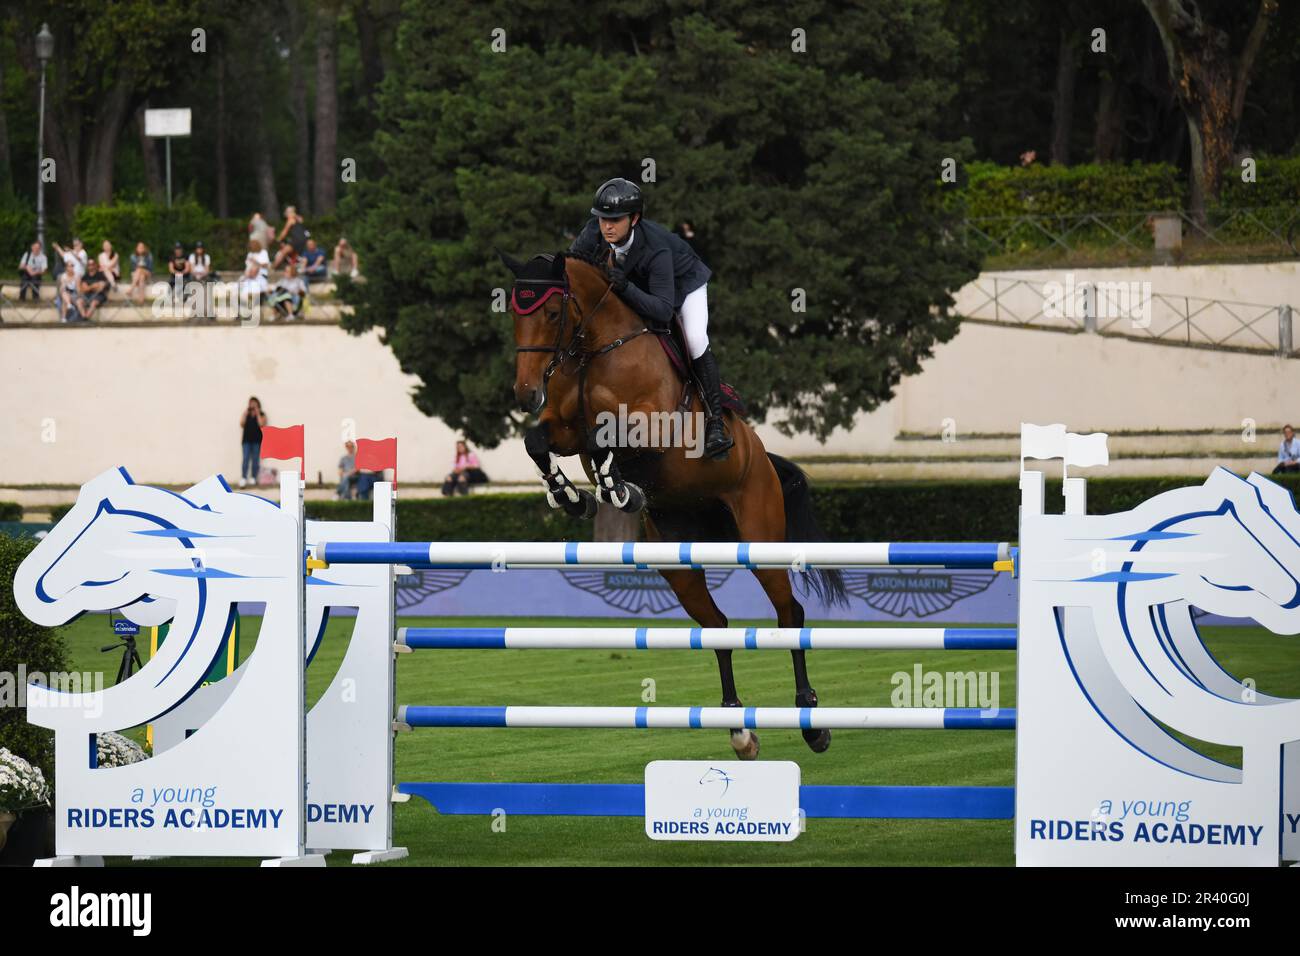 CSIO Roma 2023, Piazza di Siena, Rome, Italy, may 25 2023. Equestrian jumping competition Tab A against the clock, Filippo Bassan (ITA) jumping. Photo Credit: Fabio Pagani/Alamy Live News Stock Photo